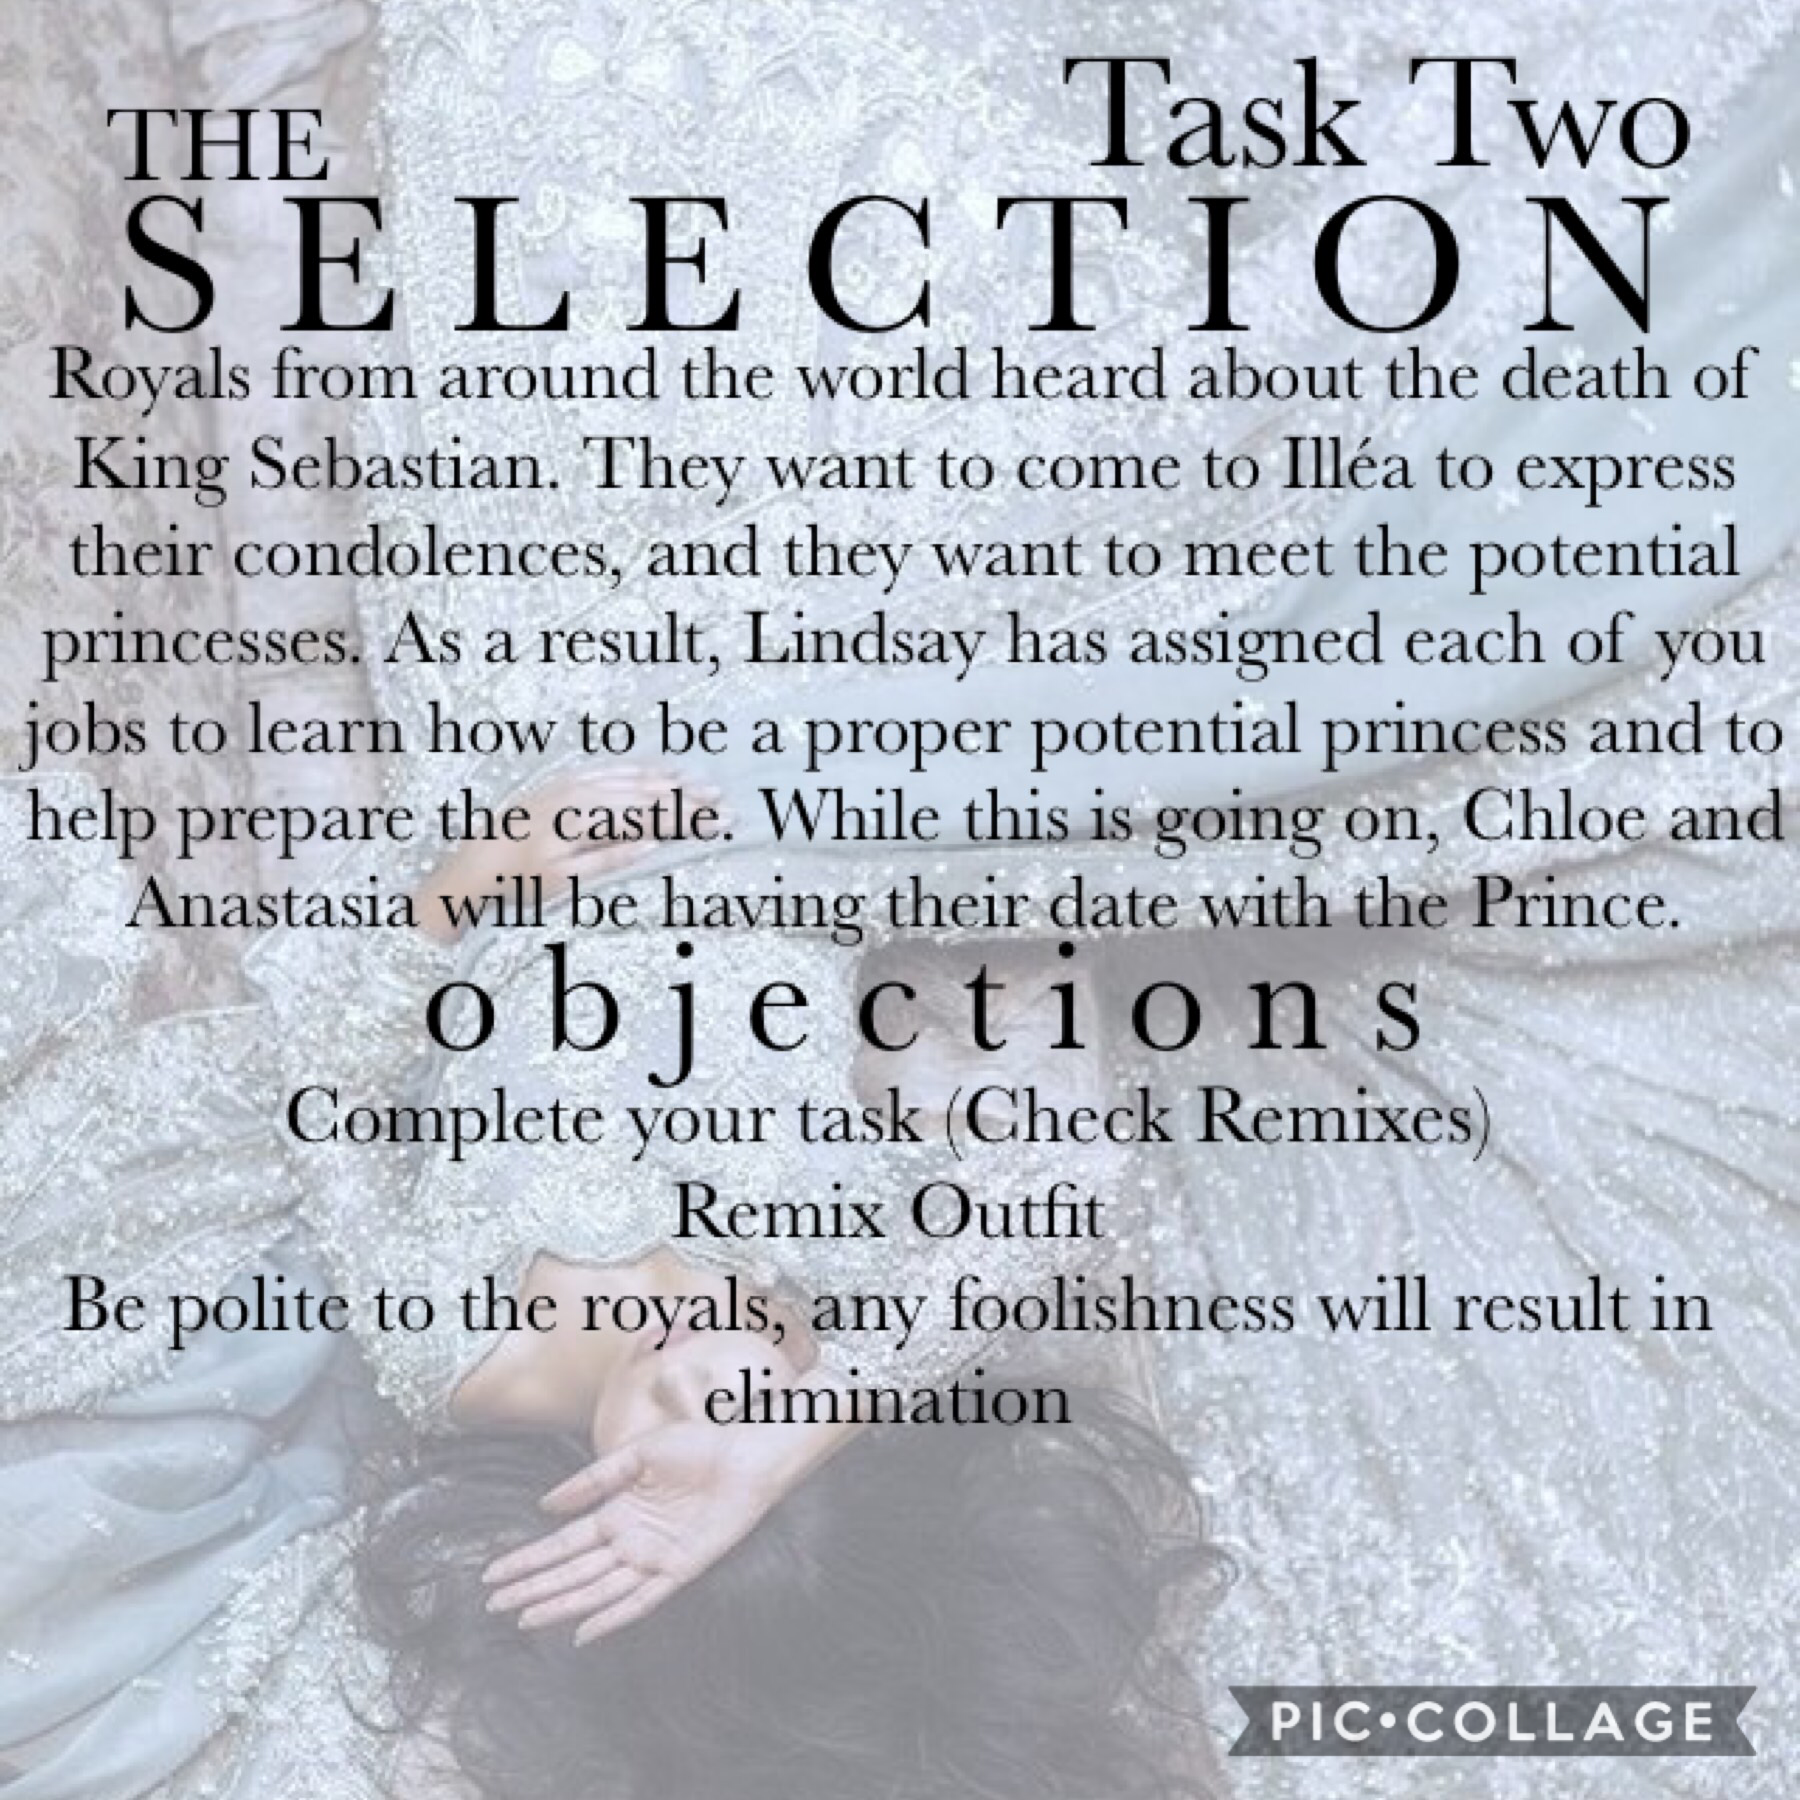 💫Task Two: Due by June 20💫